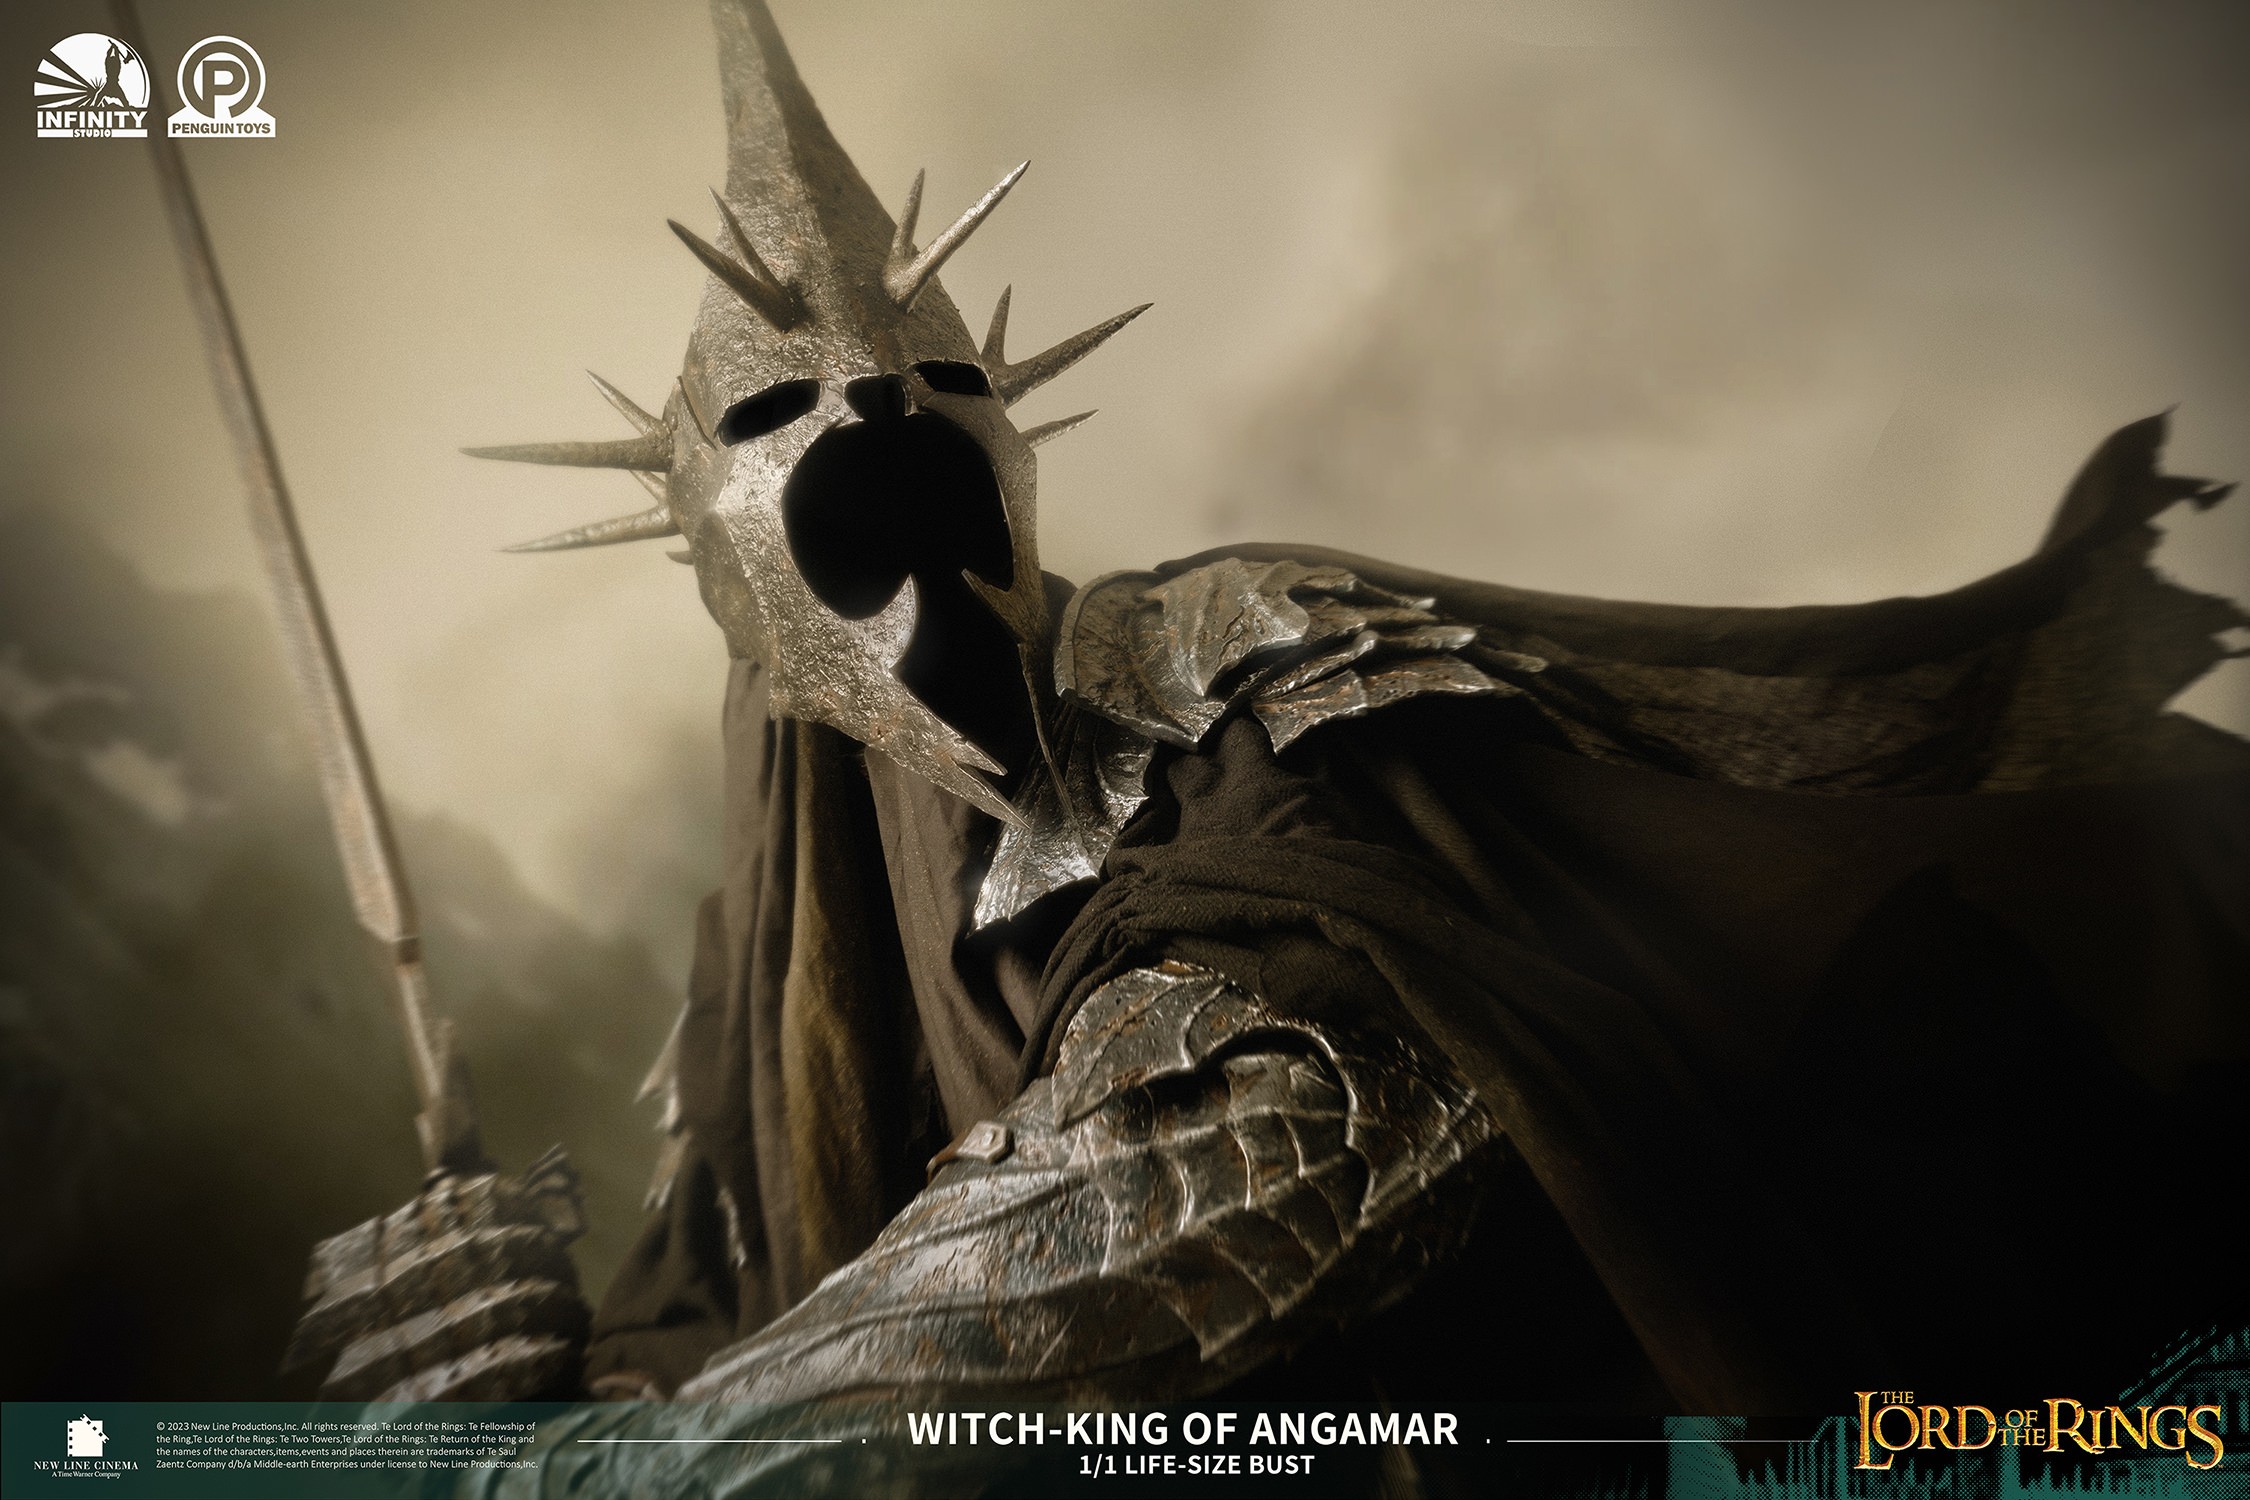 Witch-King of Angmar Life-Size Bust by Infinity Studio X Penguin 